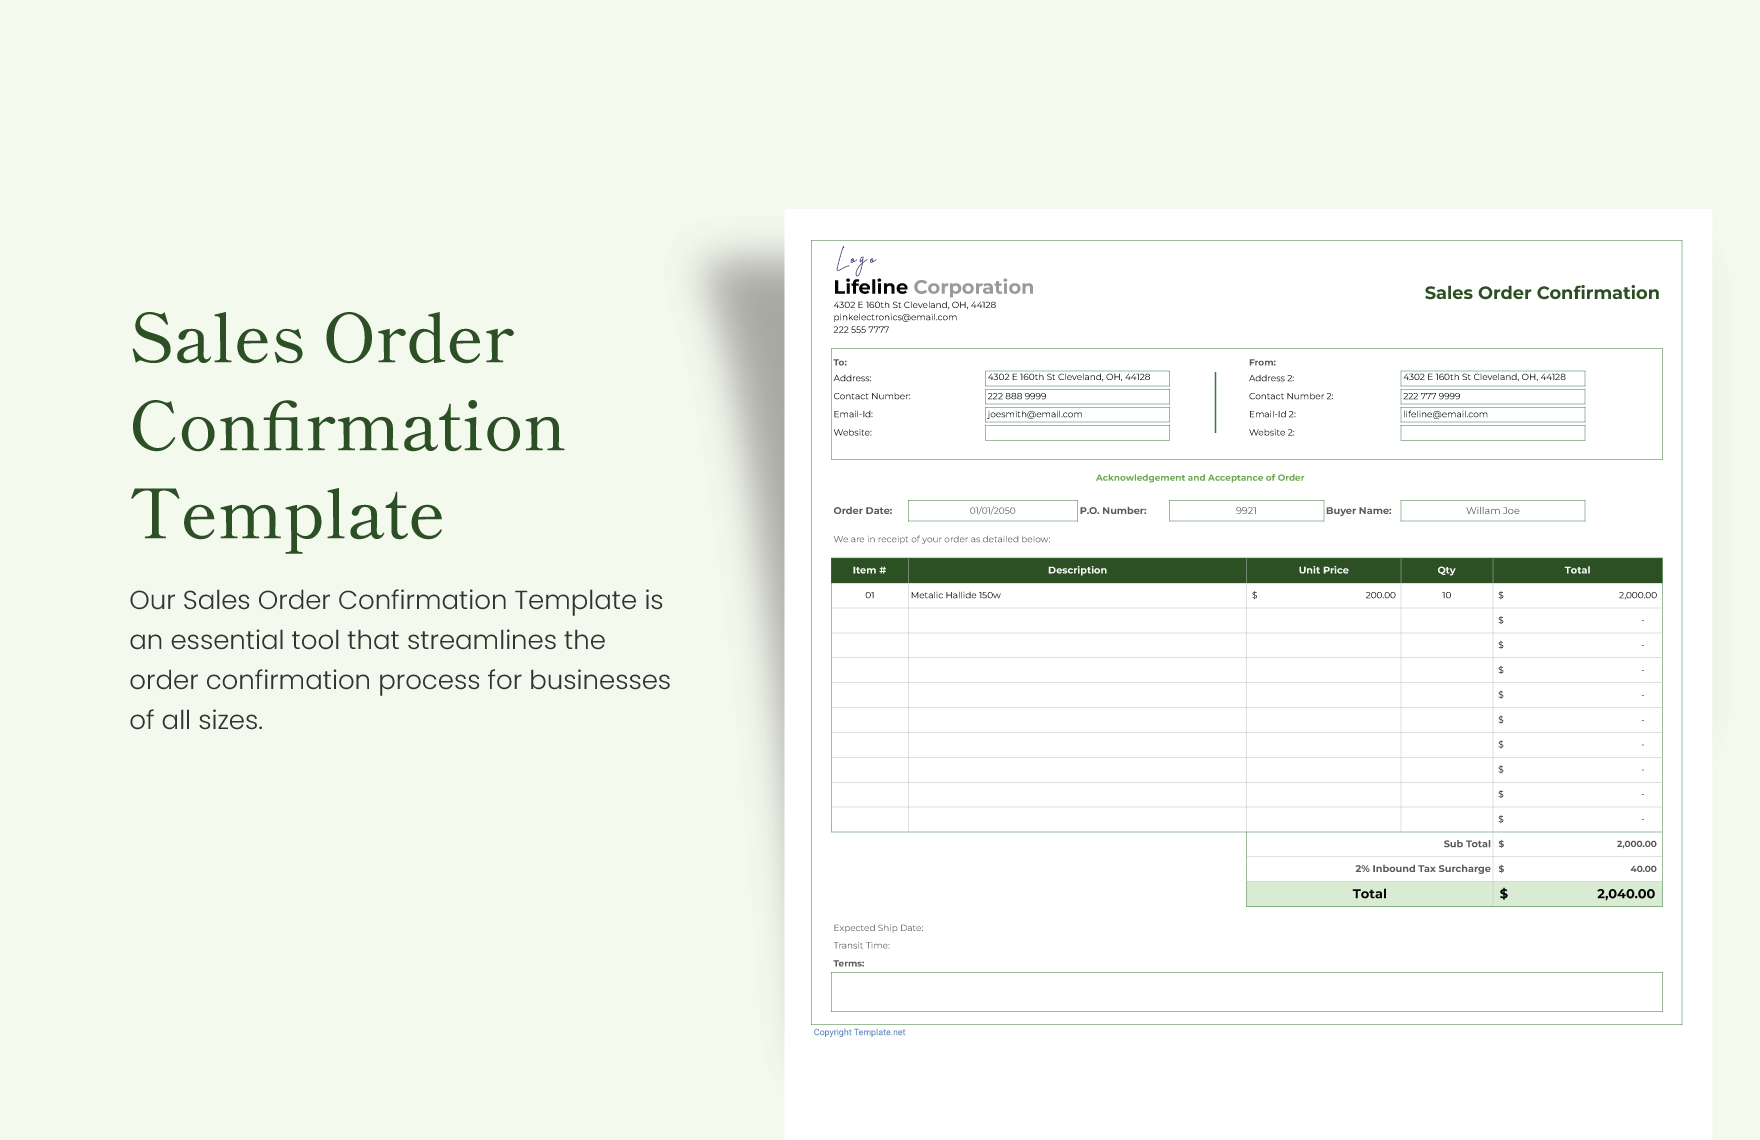 Sales Order Confirmation Template